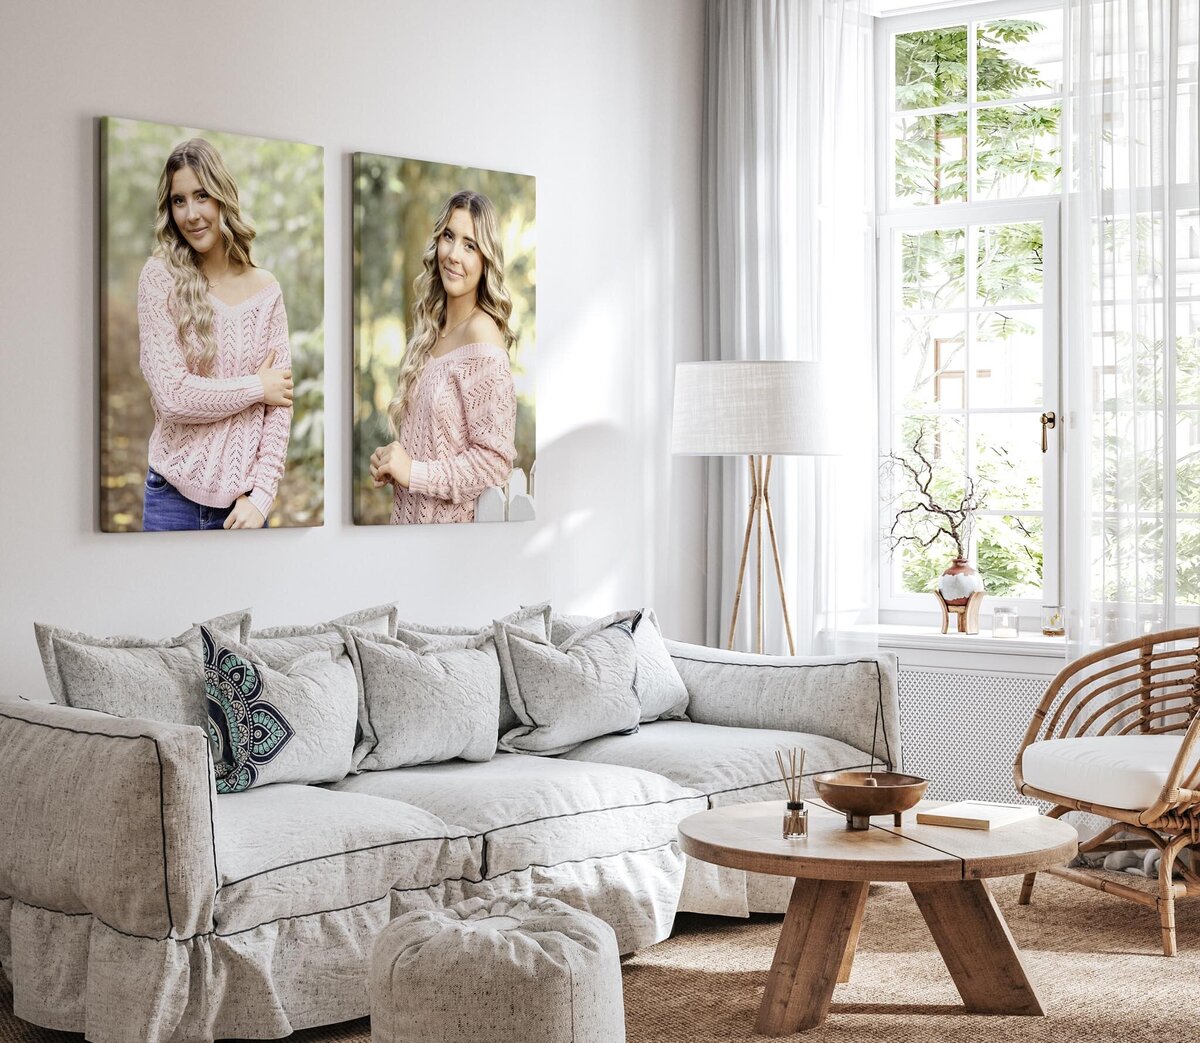 A mockup of some canvas prints hanging in a living room. The prints feature a high school senior wearing a pink sweater.